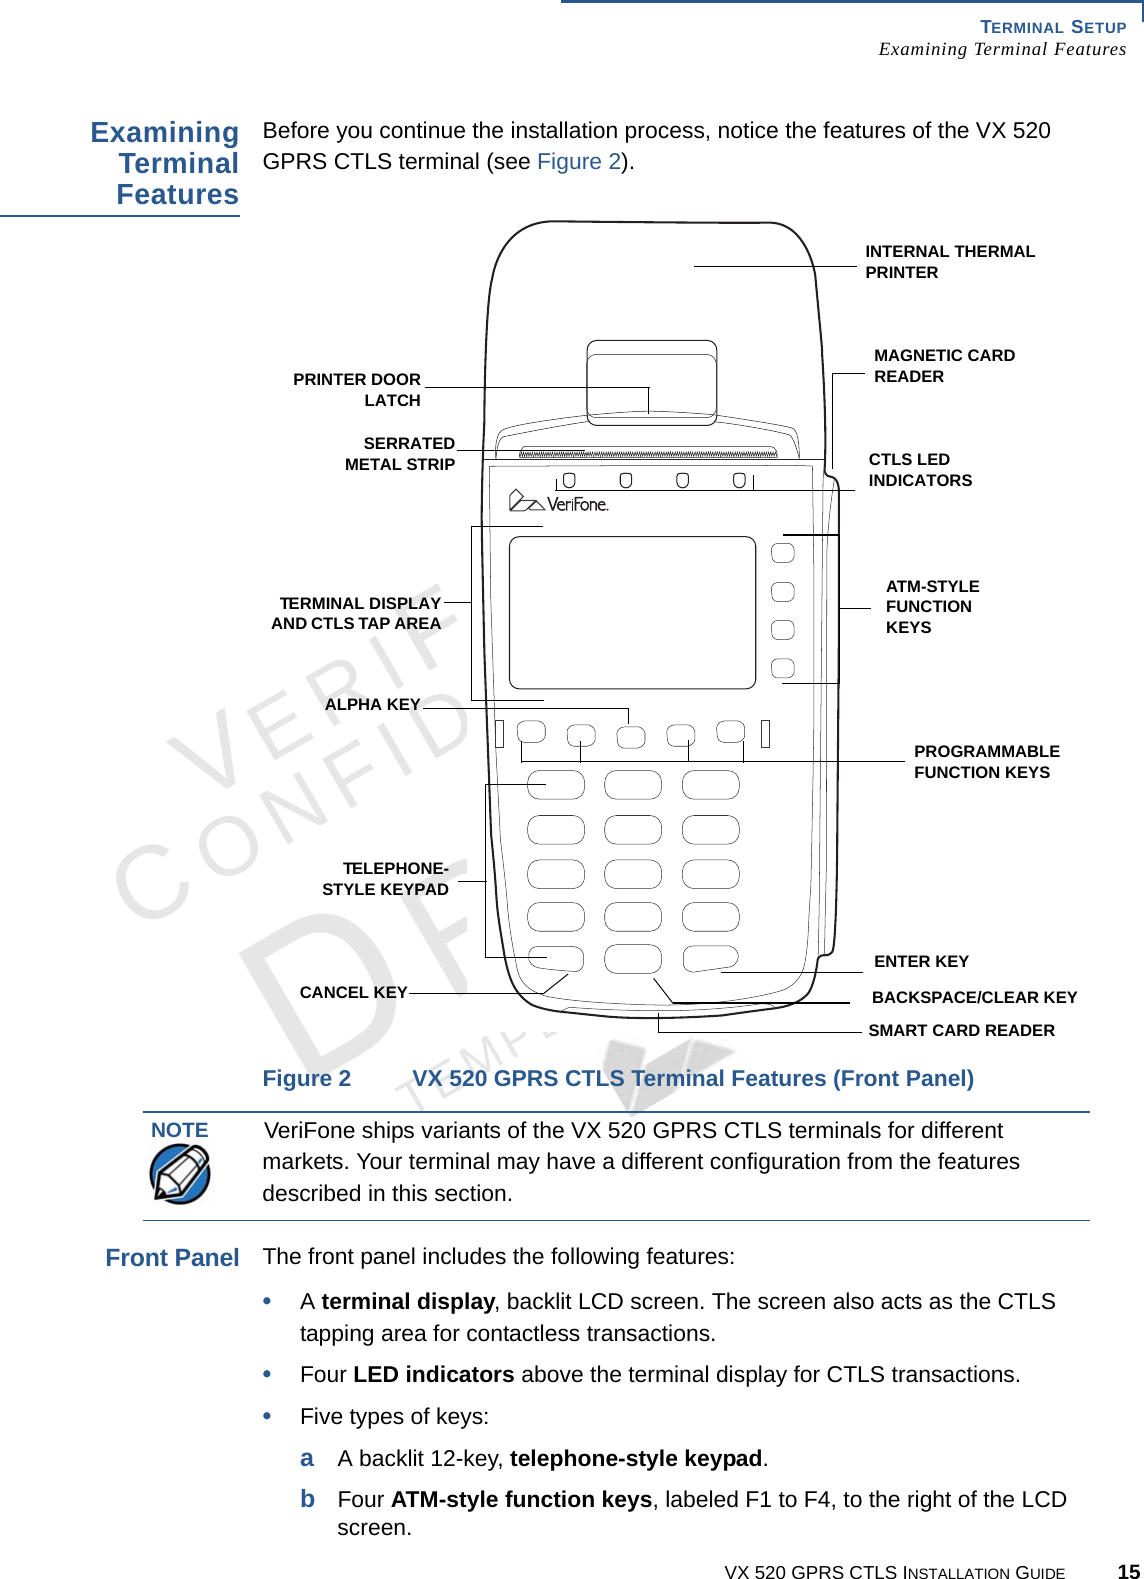 TERMINAL SETUPExamining Terminal FeaturesVX 520 GPRS CTLS INSTALLATION GUIDE 15VERIFONECONFIDENTIALTEMPLATE REV F ExaminingTerminalFeaturesBefore you continue the installation process, notice the features of the VX 520 GPRS CTLS terminal (see Figure 2).Figure 2 VX 520 GPRS CTLS Terminal Features (Front Panel)Front PanelThe front panel includes the following features:•A terminal display, backlit LCD screen. The screen also acts as the CTLS tapping area for contactless transactions.•Four LED indicators above the terminal display for CTLS transactions.•Five types of keys:aA backlit 12-key, telephone-style keypad.bFour ATM-style function keys, labeled F1 to F4, to the right of the LCD screen.INTERNAL THERMAL PRINTERMAGNETIC CARD READER ATM-STYLE FUNCTION KEYSPROGRAMMABLE FUNCTION KEYSENTER KEYBACKSPACE/CLEAR KEYSMART CARD READERCANCEL KEYTELEPHONE-STYLE KEYPADALPHA KEYTERMINAL DISPLAYAND CTLS TAP AREASERRATEDMETAL STRIPPRINTER DOORLATCHCTLS LED INDICATORSNOTEVeriFone ships variants of the VX 520 GPRS CTLS terminals for different markets. Your terminal may have a different configuration from the features described in this section.